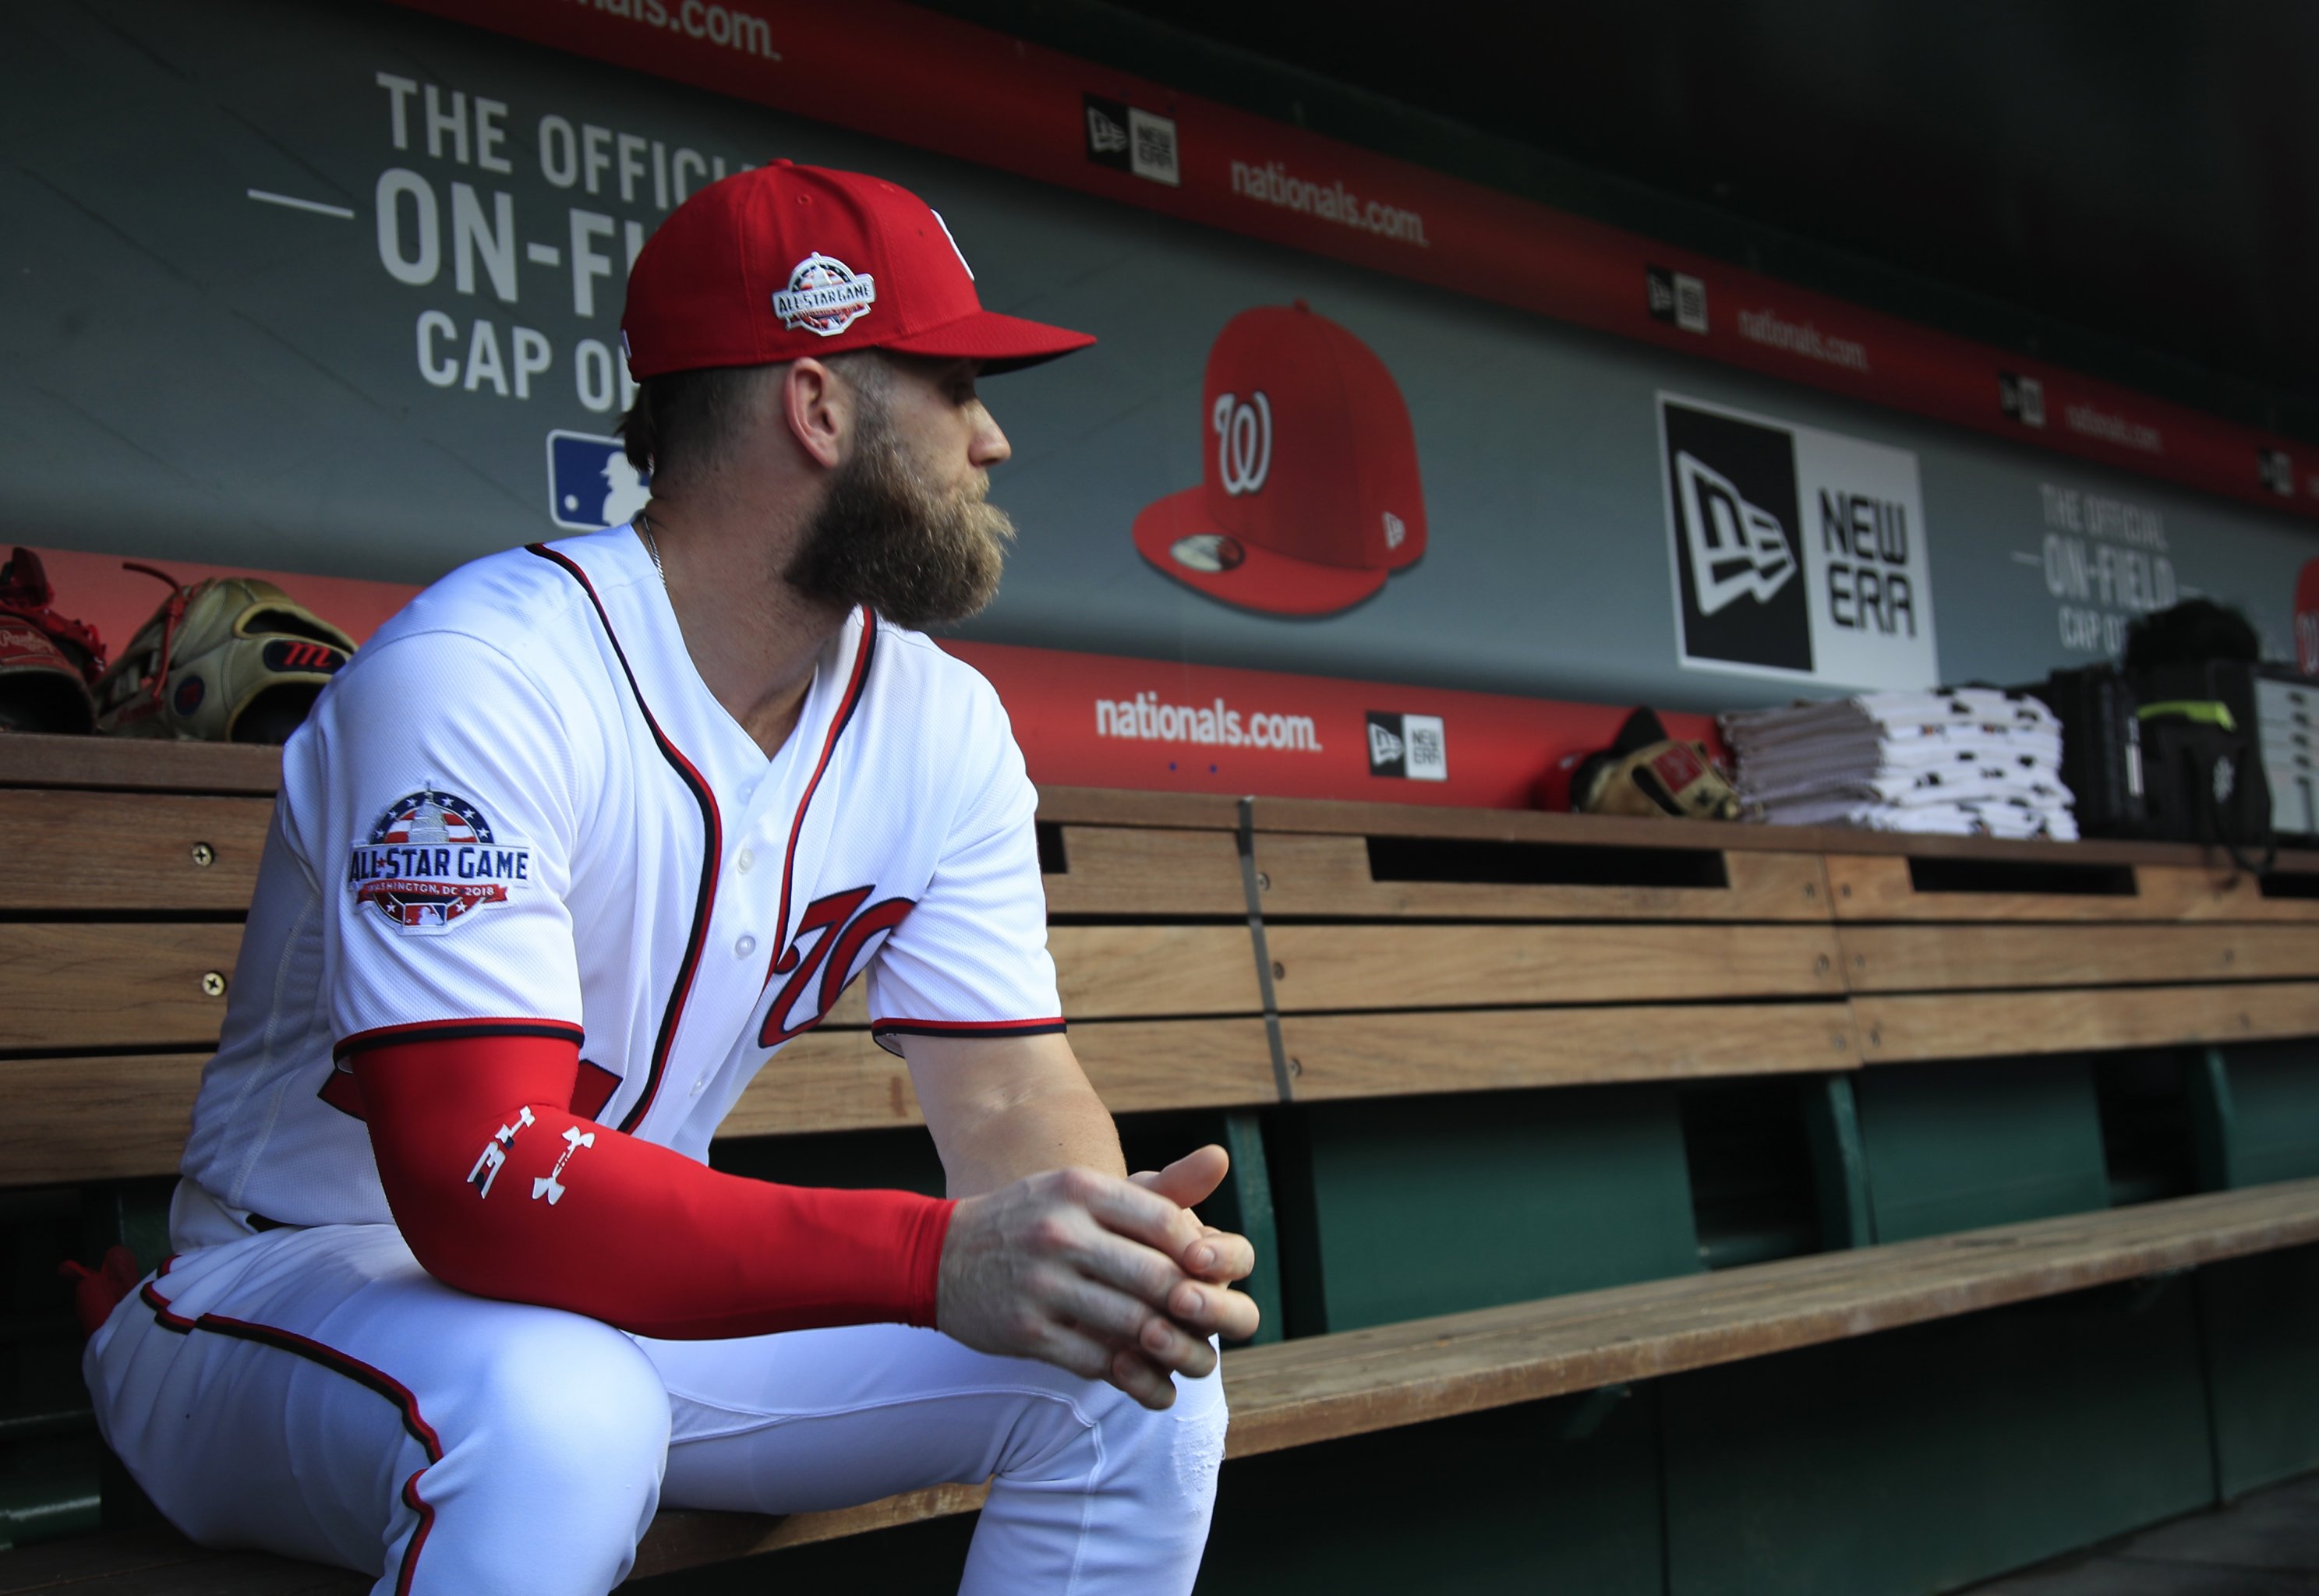 the unreal world i wish was reality • gfbaseball: Bryce Harper charges the  mound after